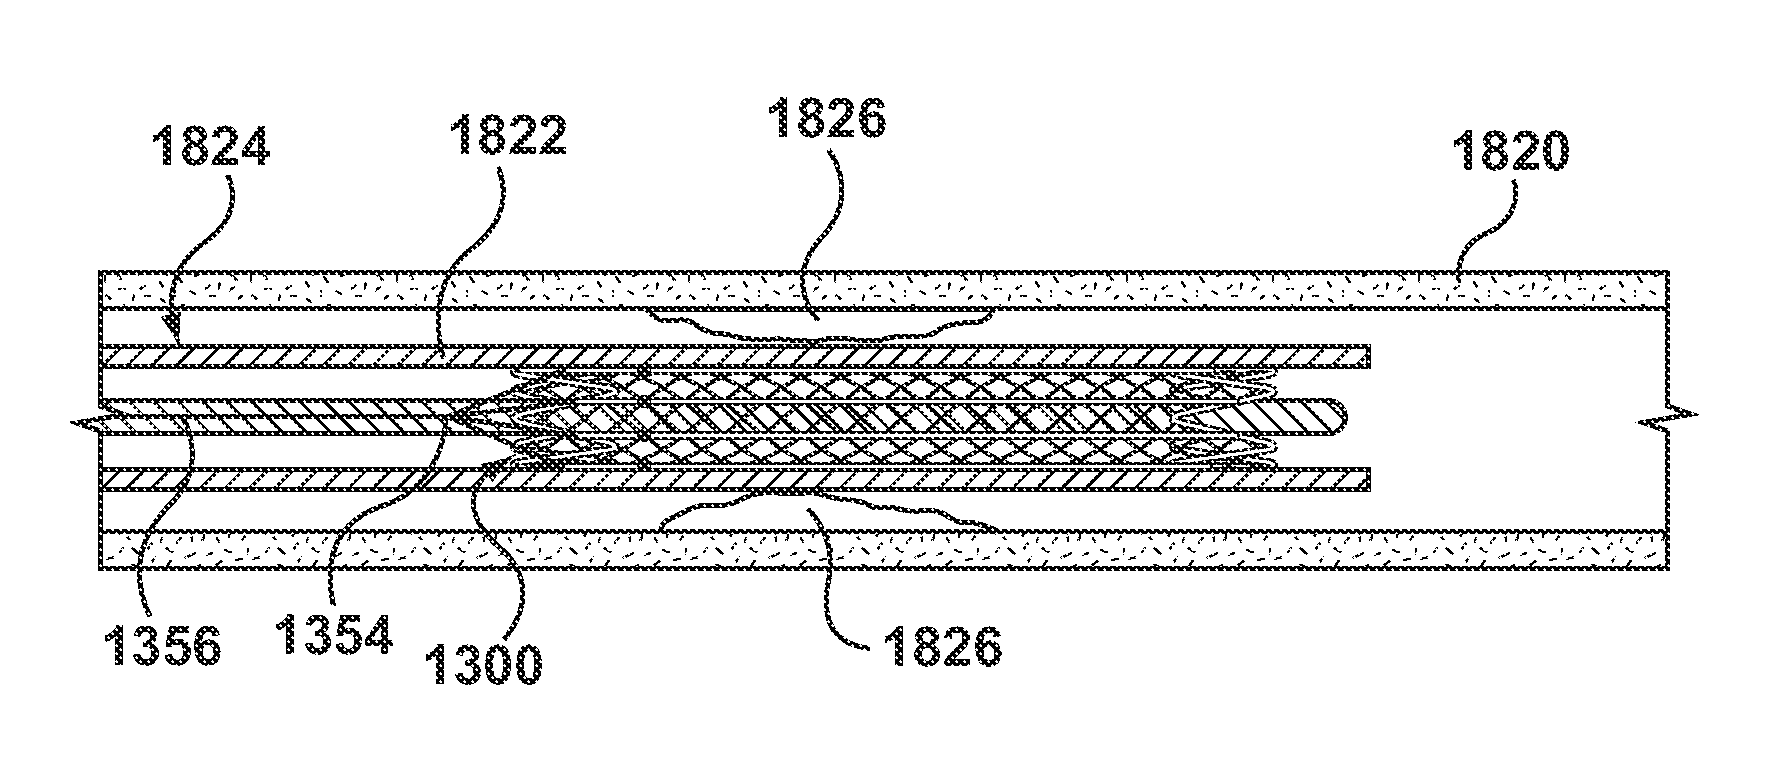 Biodegradable Stent Having Non-Biodegradable End Portions and Mechanisms for Increased Stent Hoop Strength